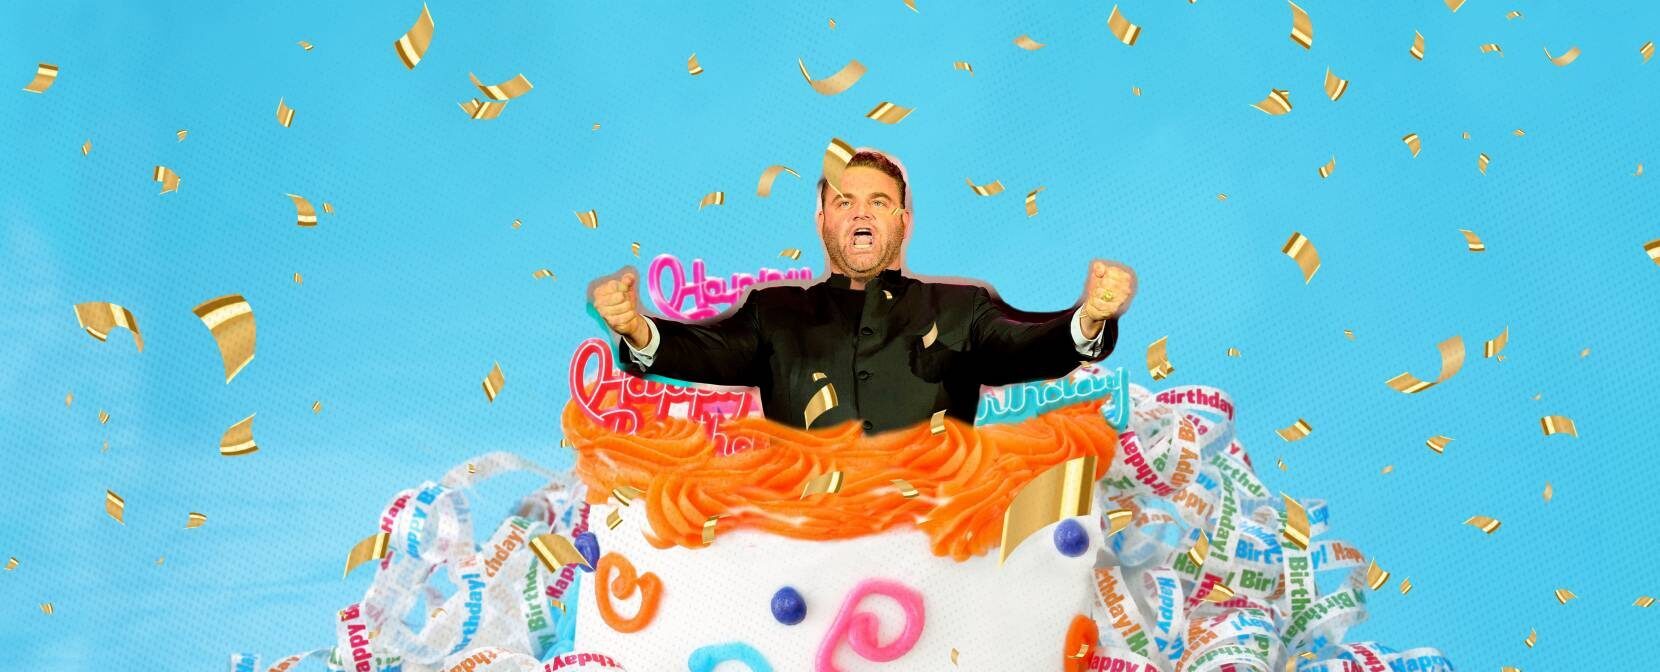 Opera singer popping out of giant cake singing happy birthday